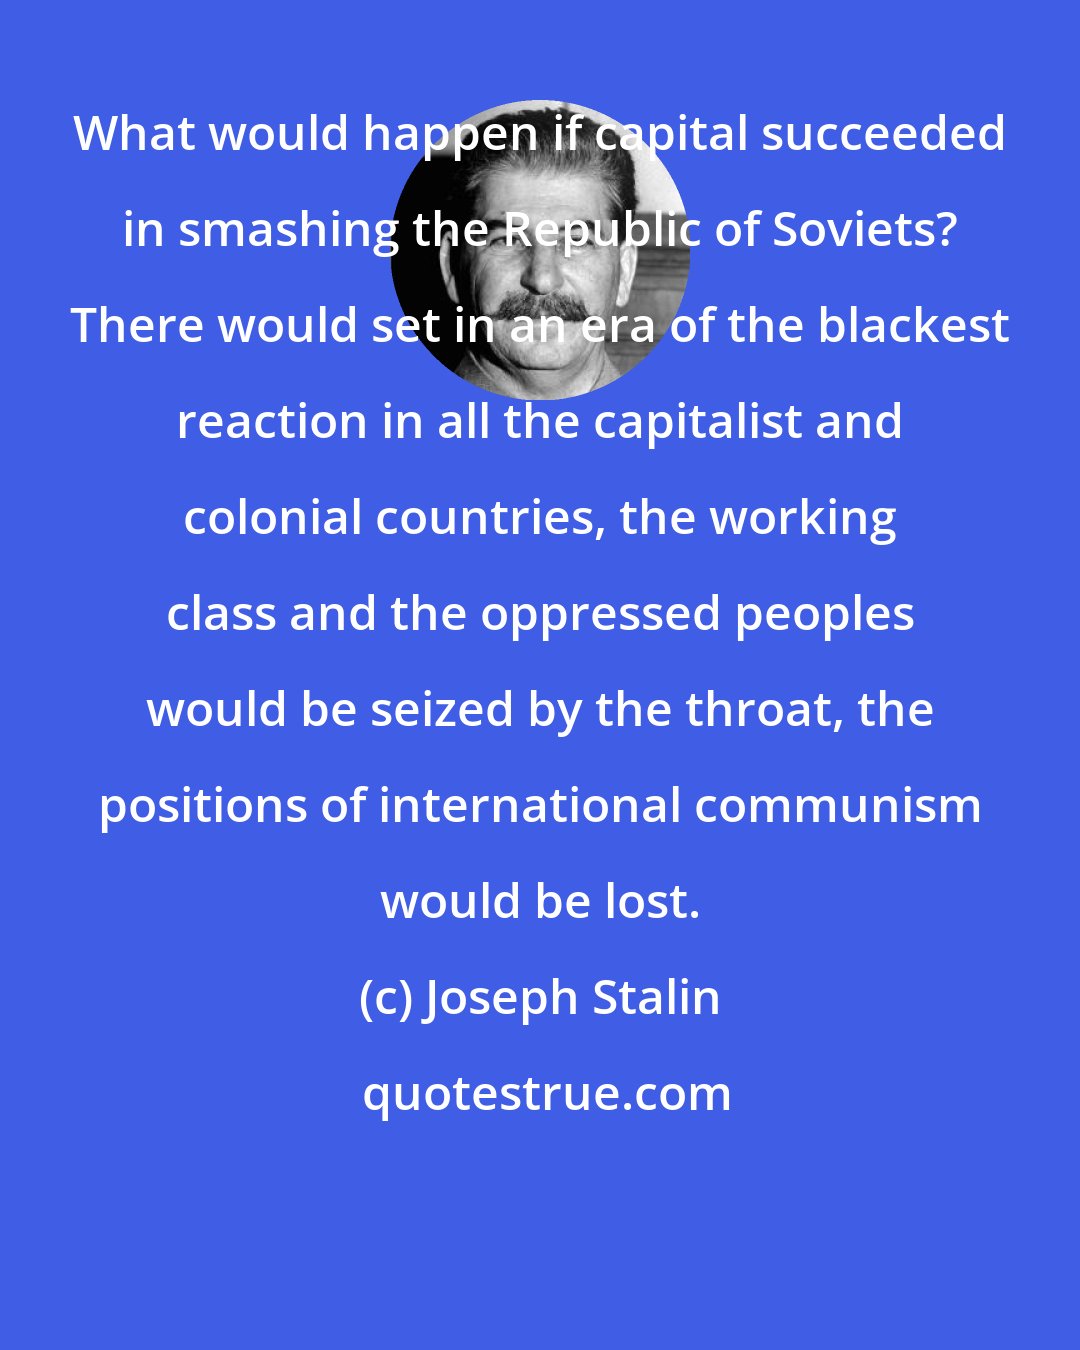 Joseph Stalin: What would happen if capital succeeded in smashing the Republic of Soviets? There would set in an era of the blackest reaction in all the capitalist and colonial countries, the working class and the oppressed peoples would be seized by the throat, the positions of international communism would be lost.